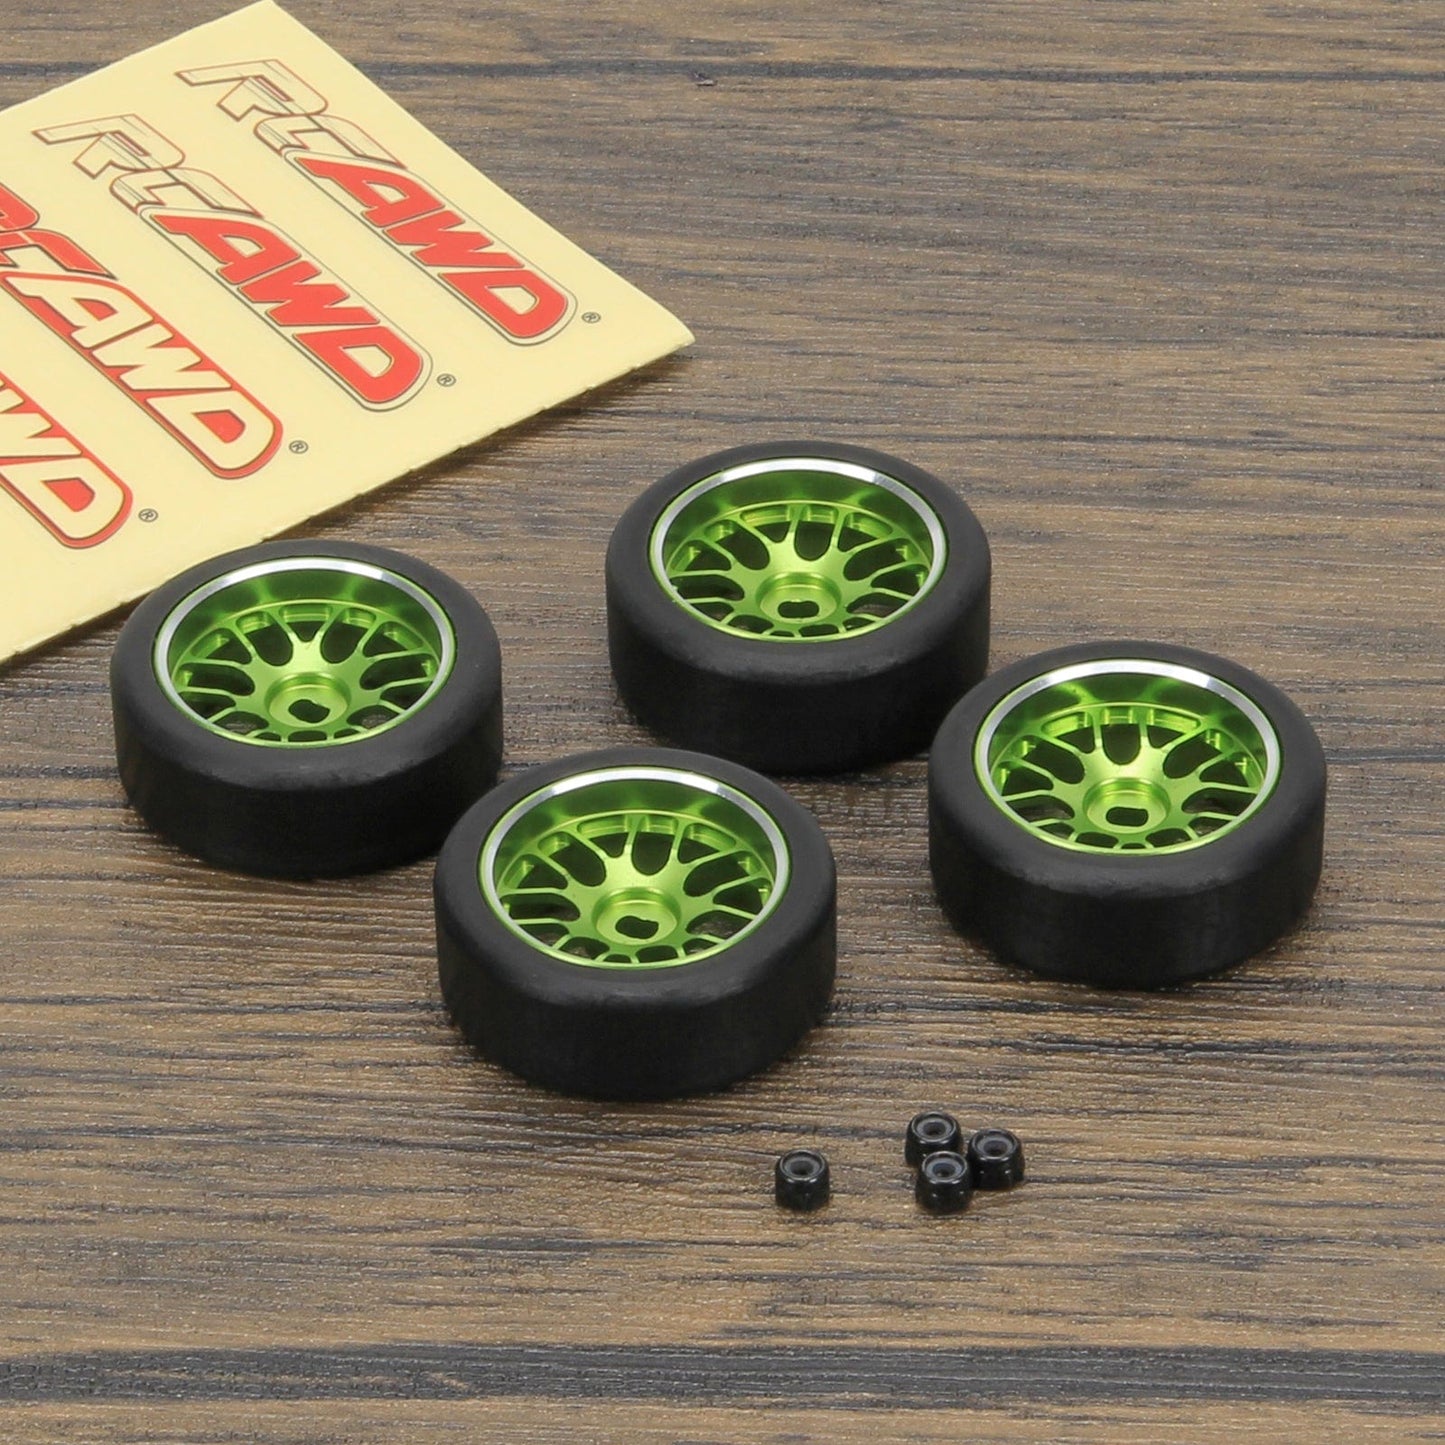 RCAWD WLTOYS K969 K989 P929 Green RCAWD Wltoys Upgrades 29mm Reticulation Drift Wheel Tires for 1/28 Wltoys K969 K989 P929